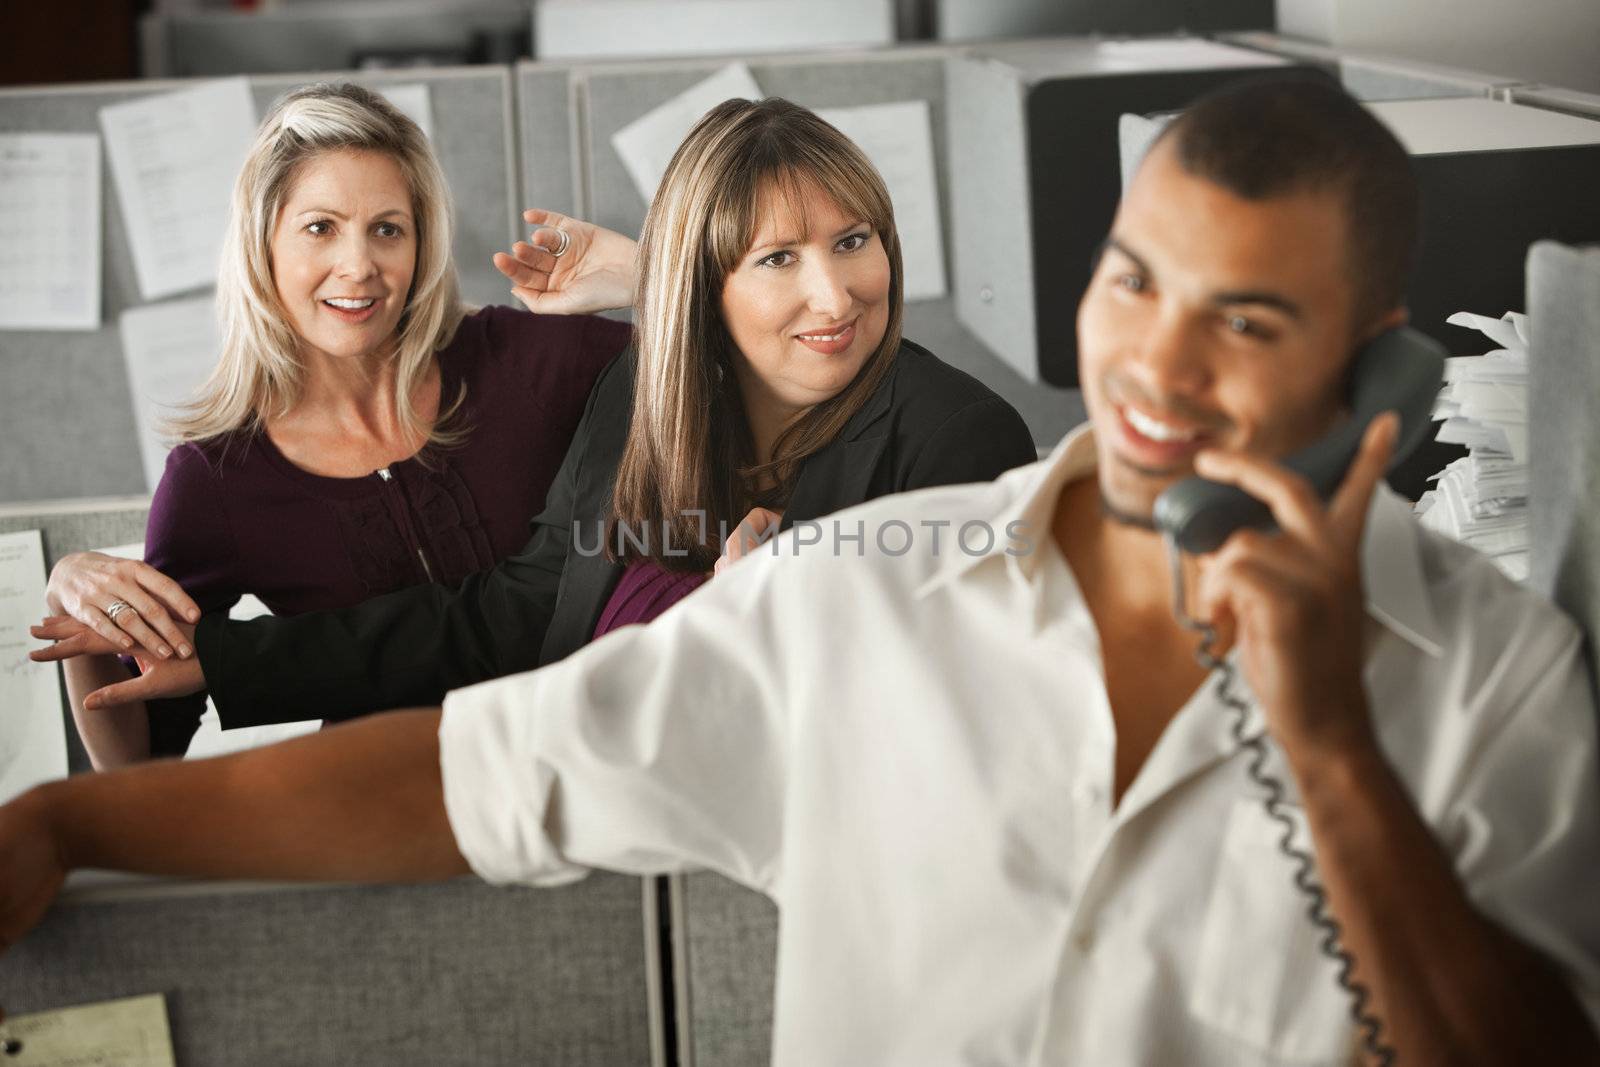 Women office workers flirt with handsome male coworker in office 